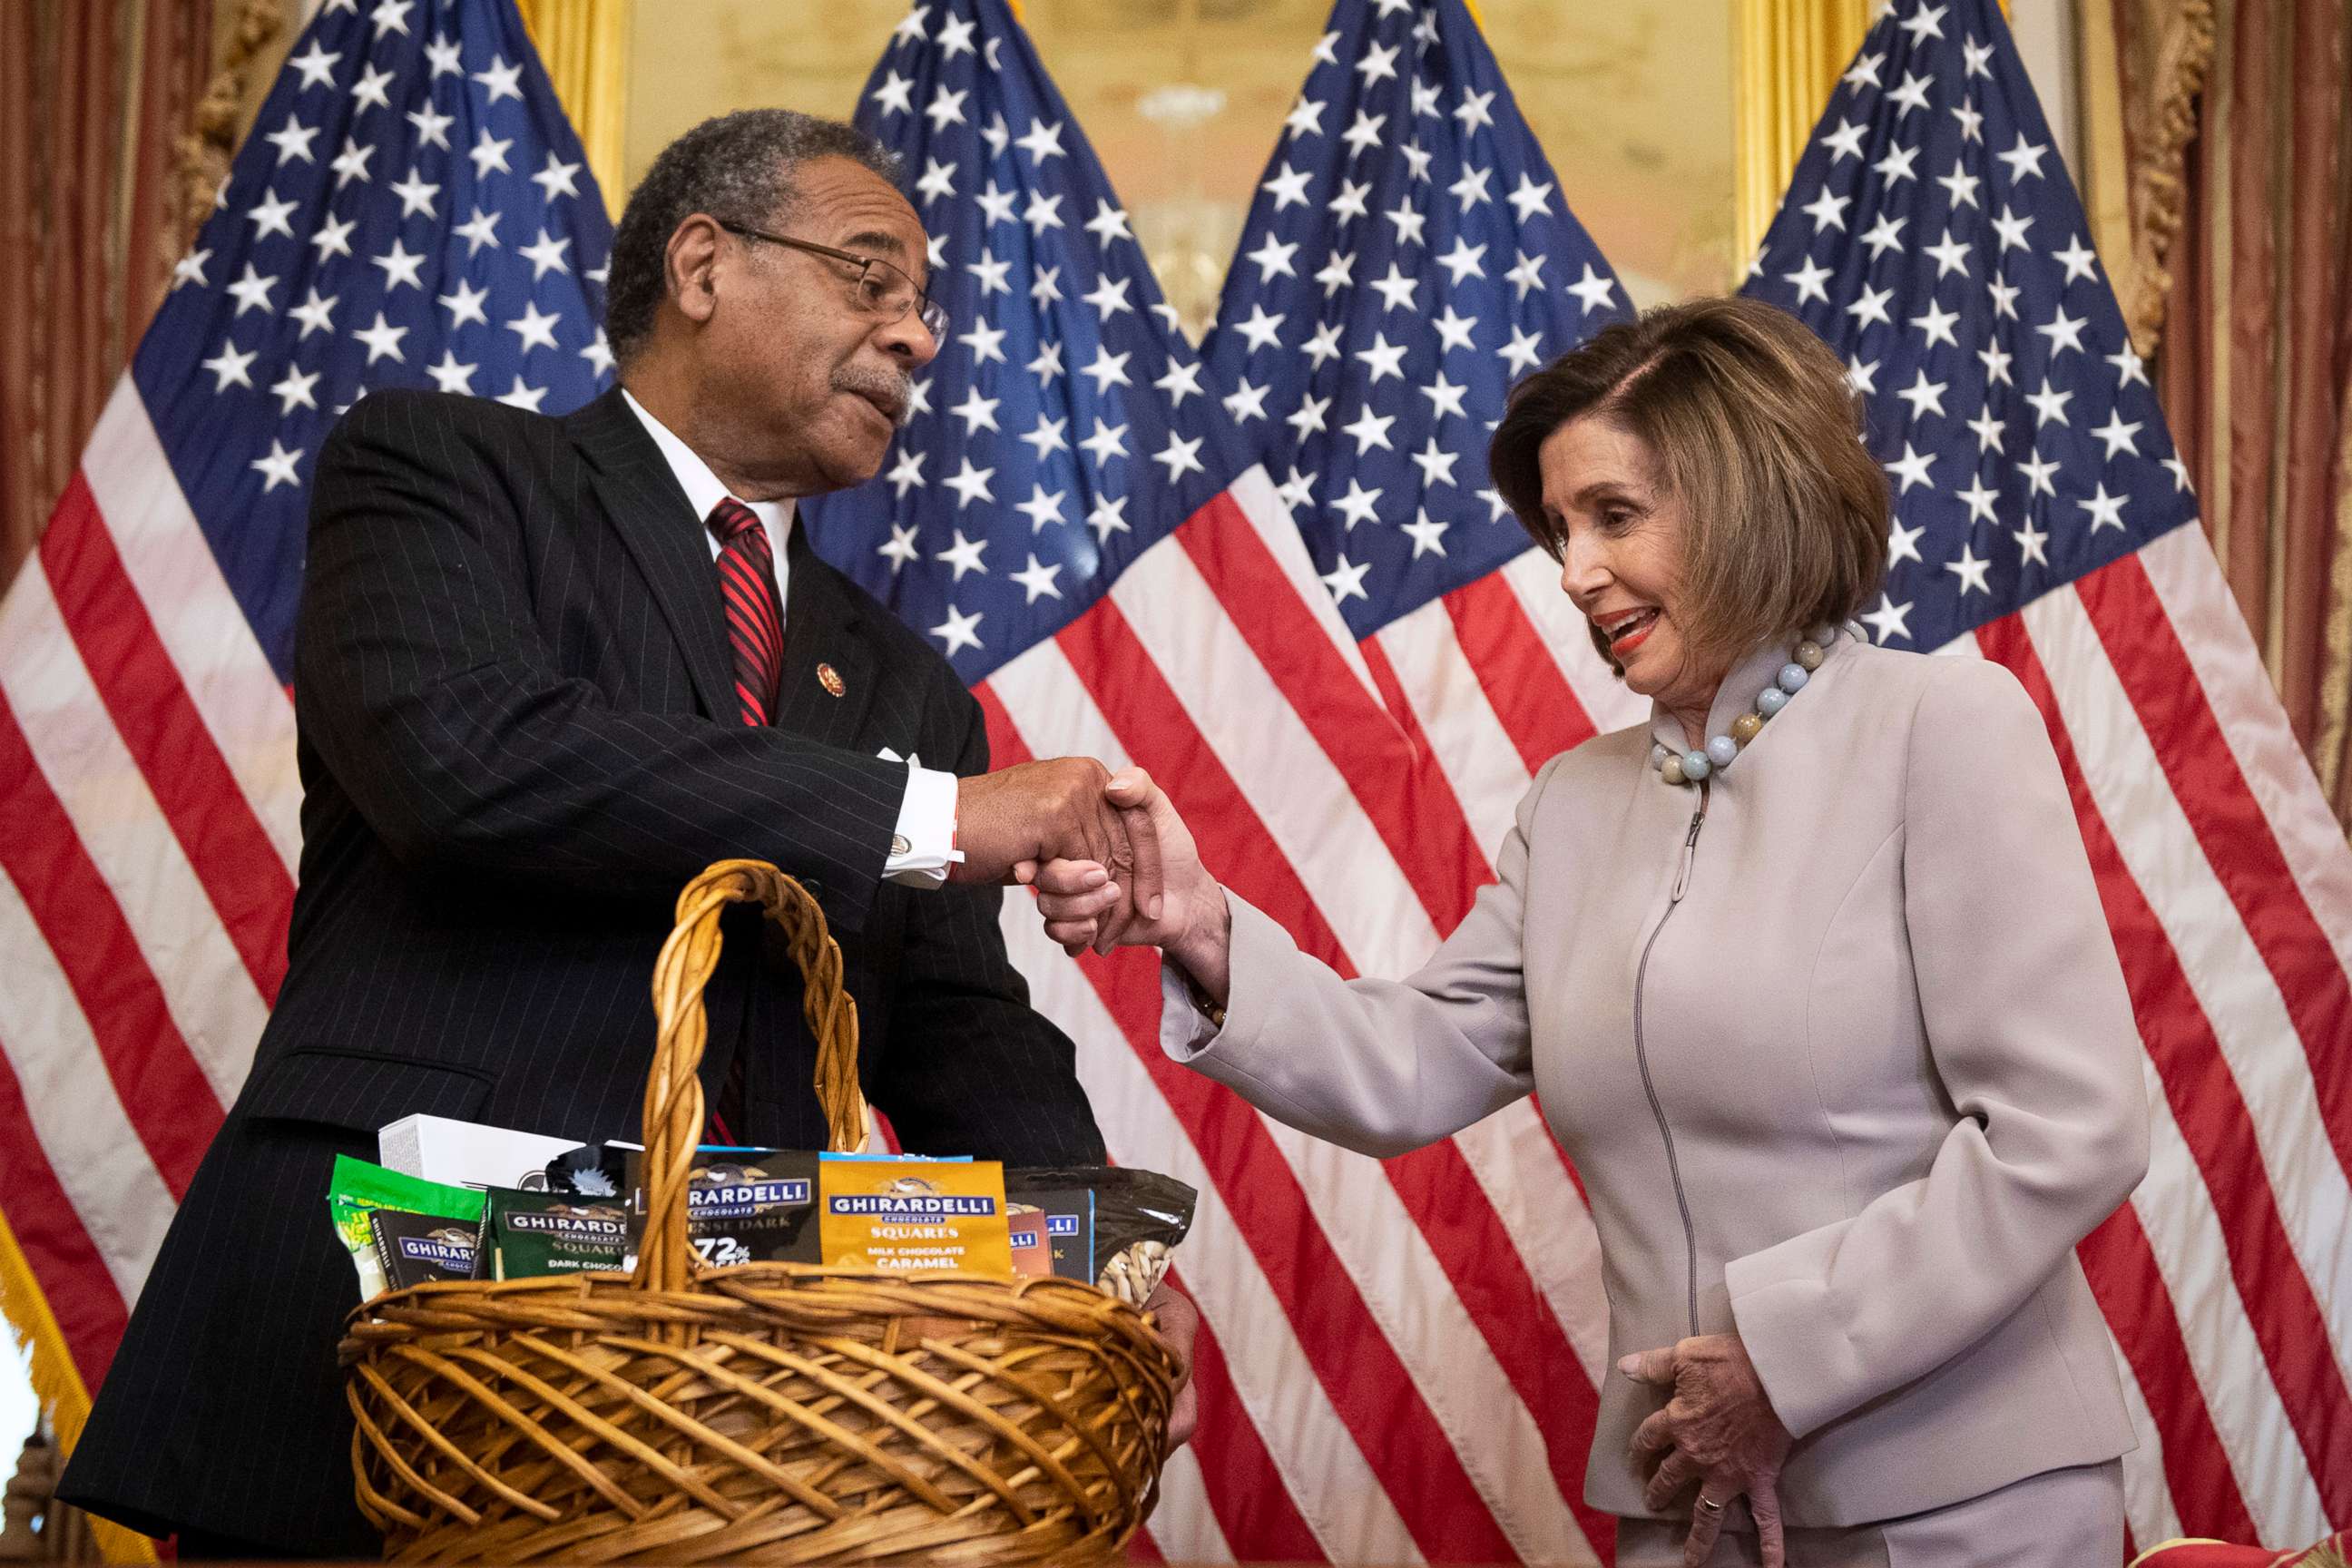 PHOTO: Speaker of the House Nancy Pelosi, right, pays off a friendly wager of California chocolates and nuts to Rep. Emanuel Cleaver, left, after the San Francisco 49ers lost the Super Bowl to the Kansas City Chiefs, at the Capitol, Feb. 11, 2020.